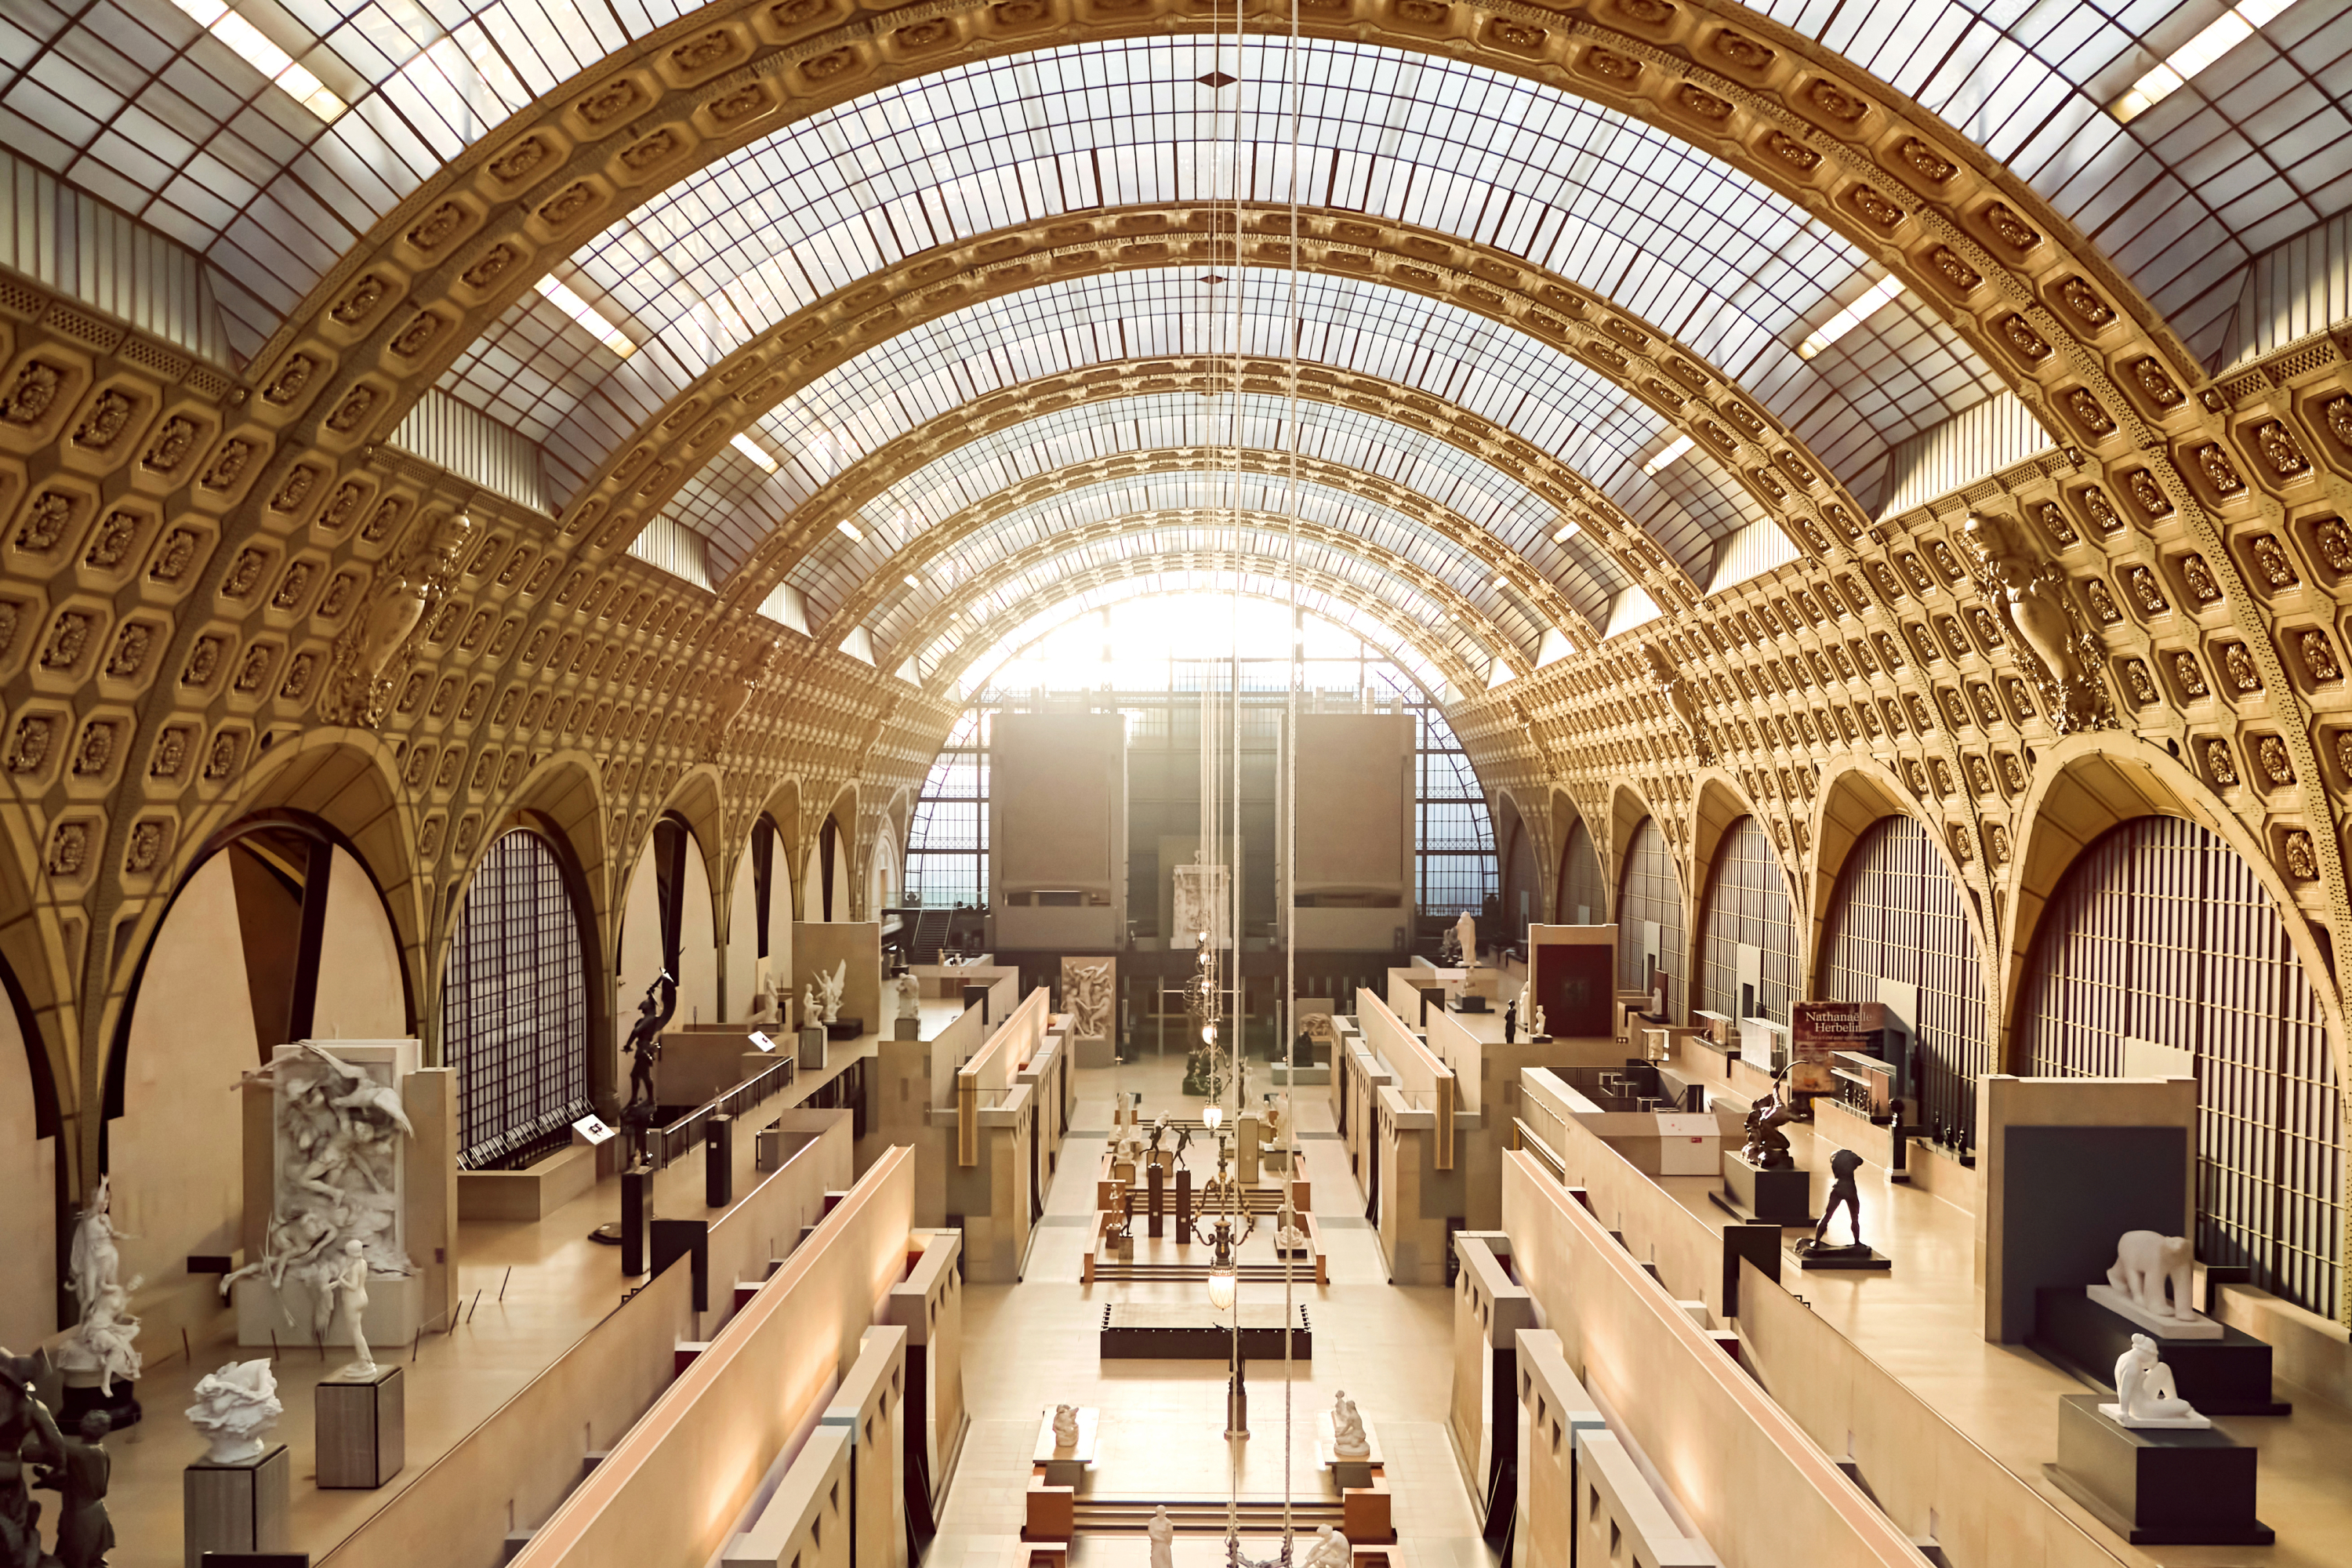 Interior view of the Musée d&#x27;Orsay showing sculptures, arches, and the grand clock